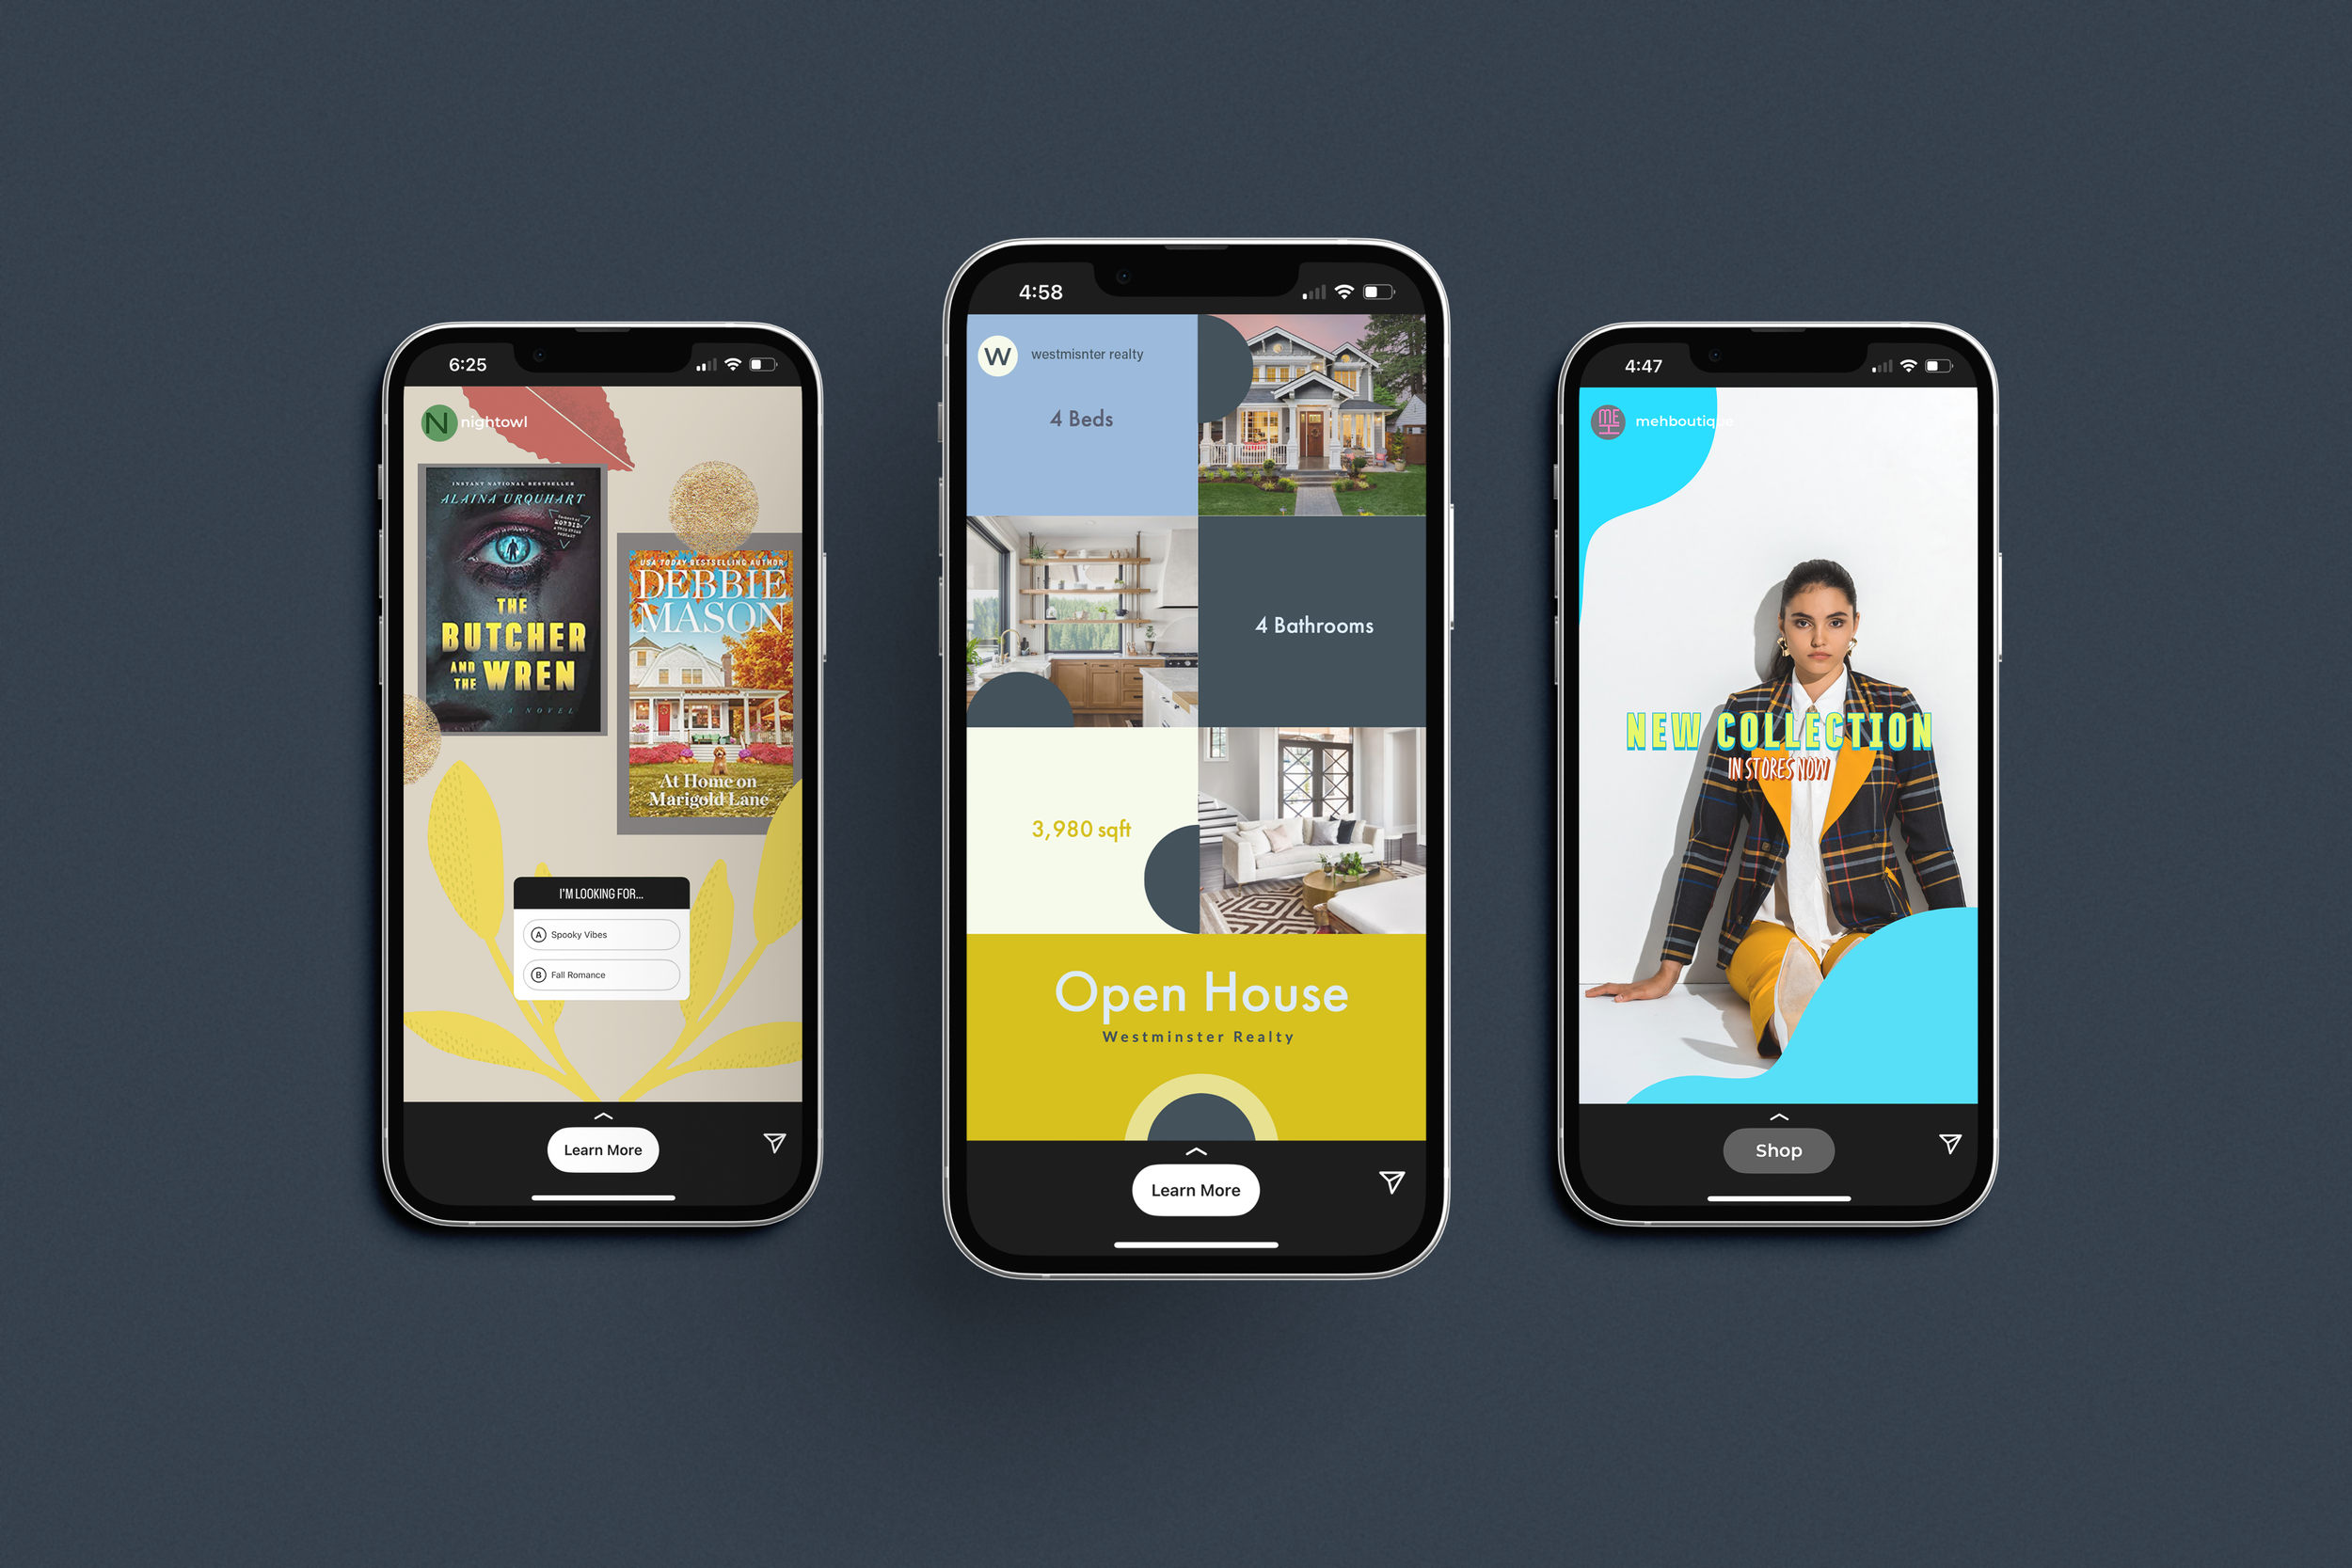 Mockup of three Instagram story templates designed by Chris Olson